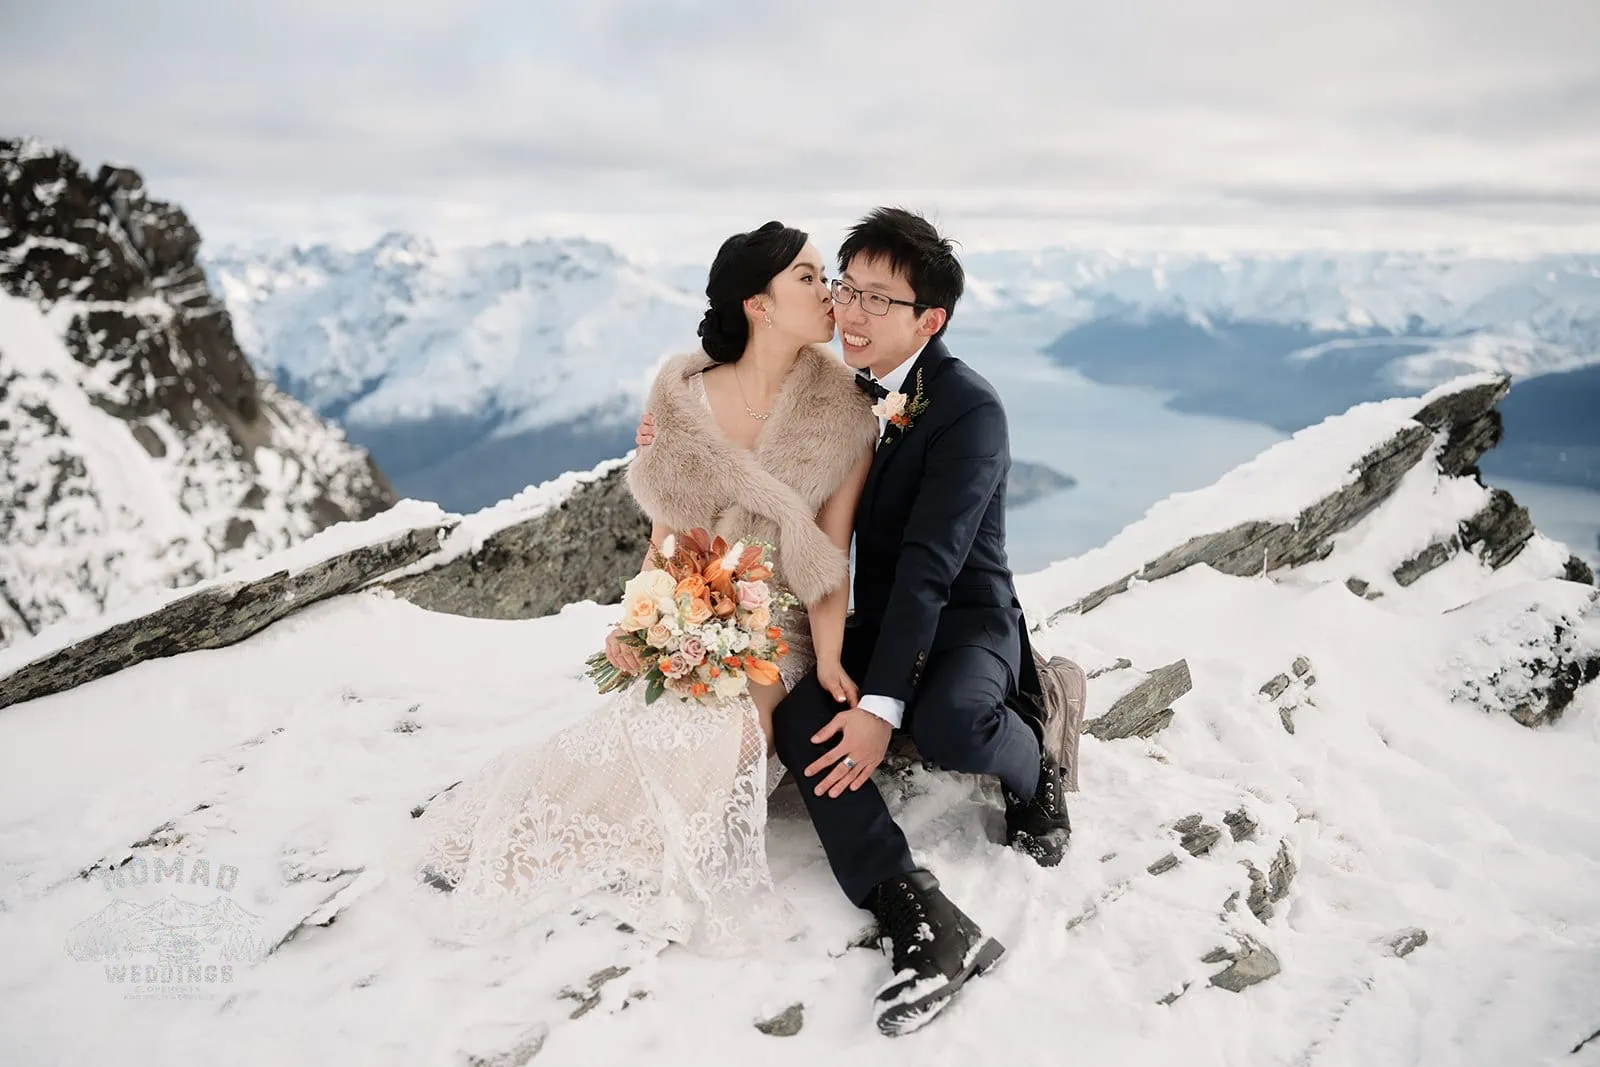 Joanna and Tony, a bride and groom, pose on top of a snow-covered mountain during their pre-wedding shoot in Queenstown, New Zealand.